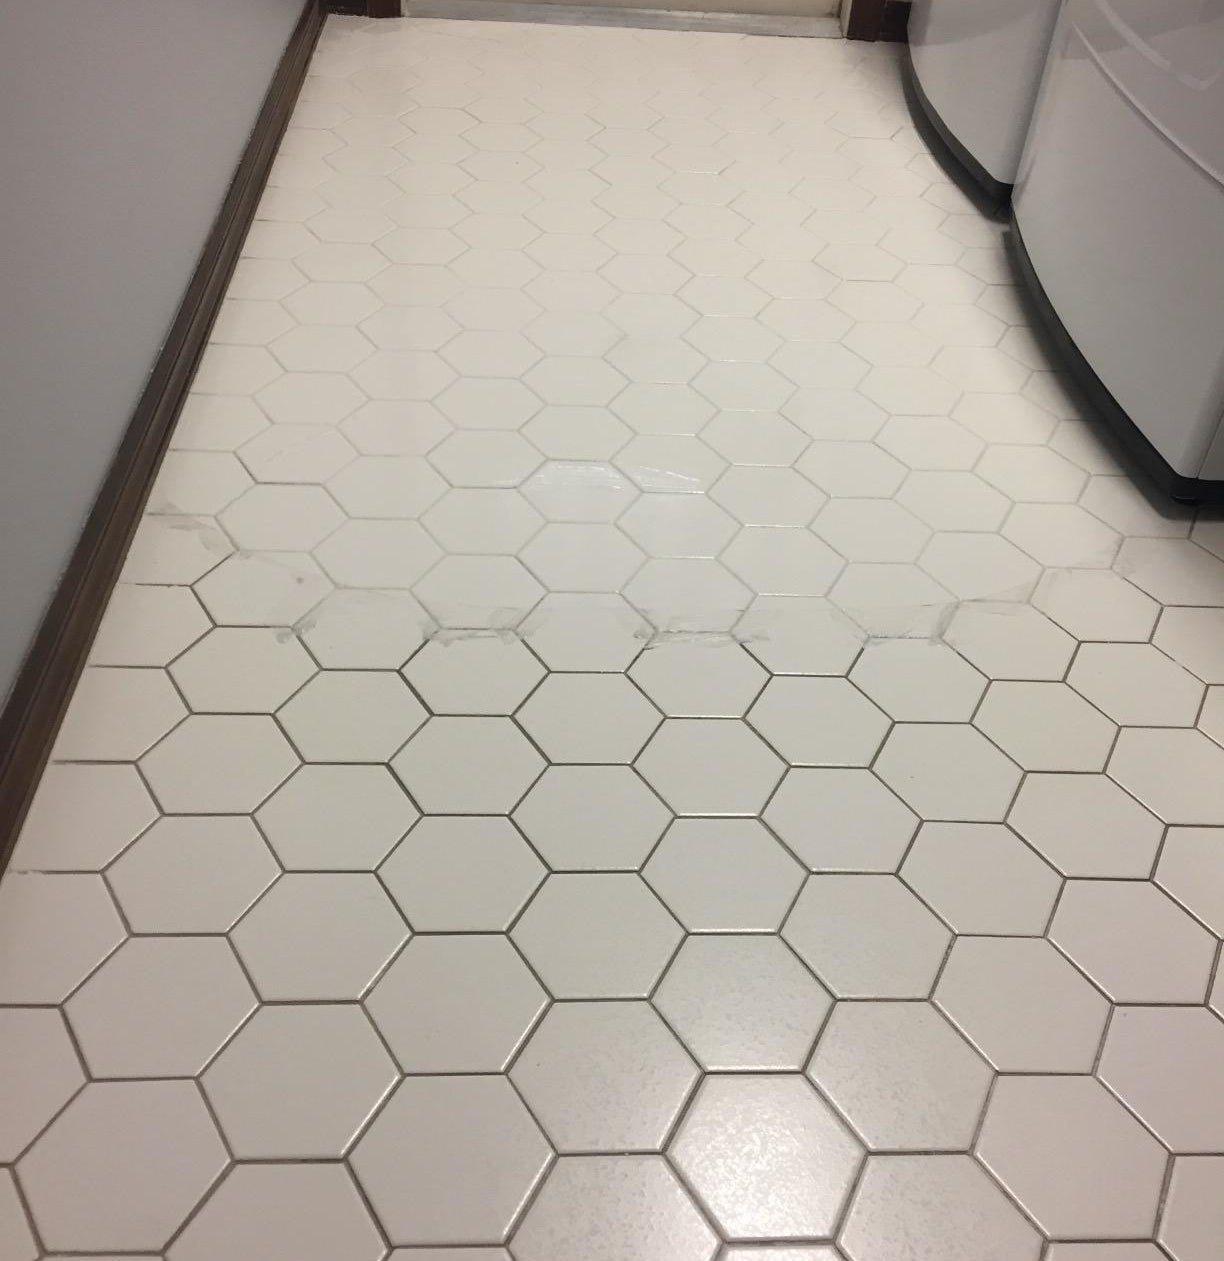 A tiled floor that has been scrubbed and now looks much brighter, whiter, and cleaner than the section of the floor that has not yet been scrubbed 